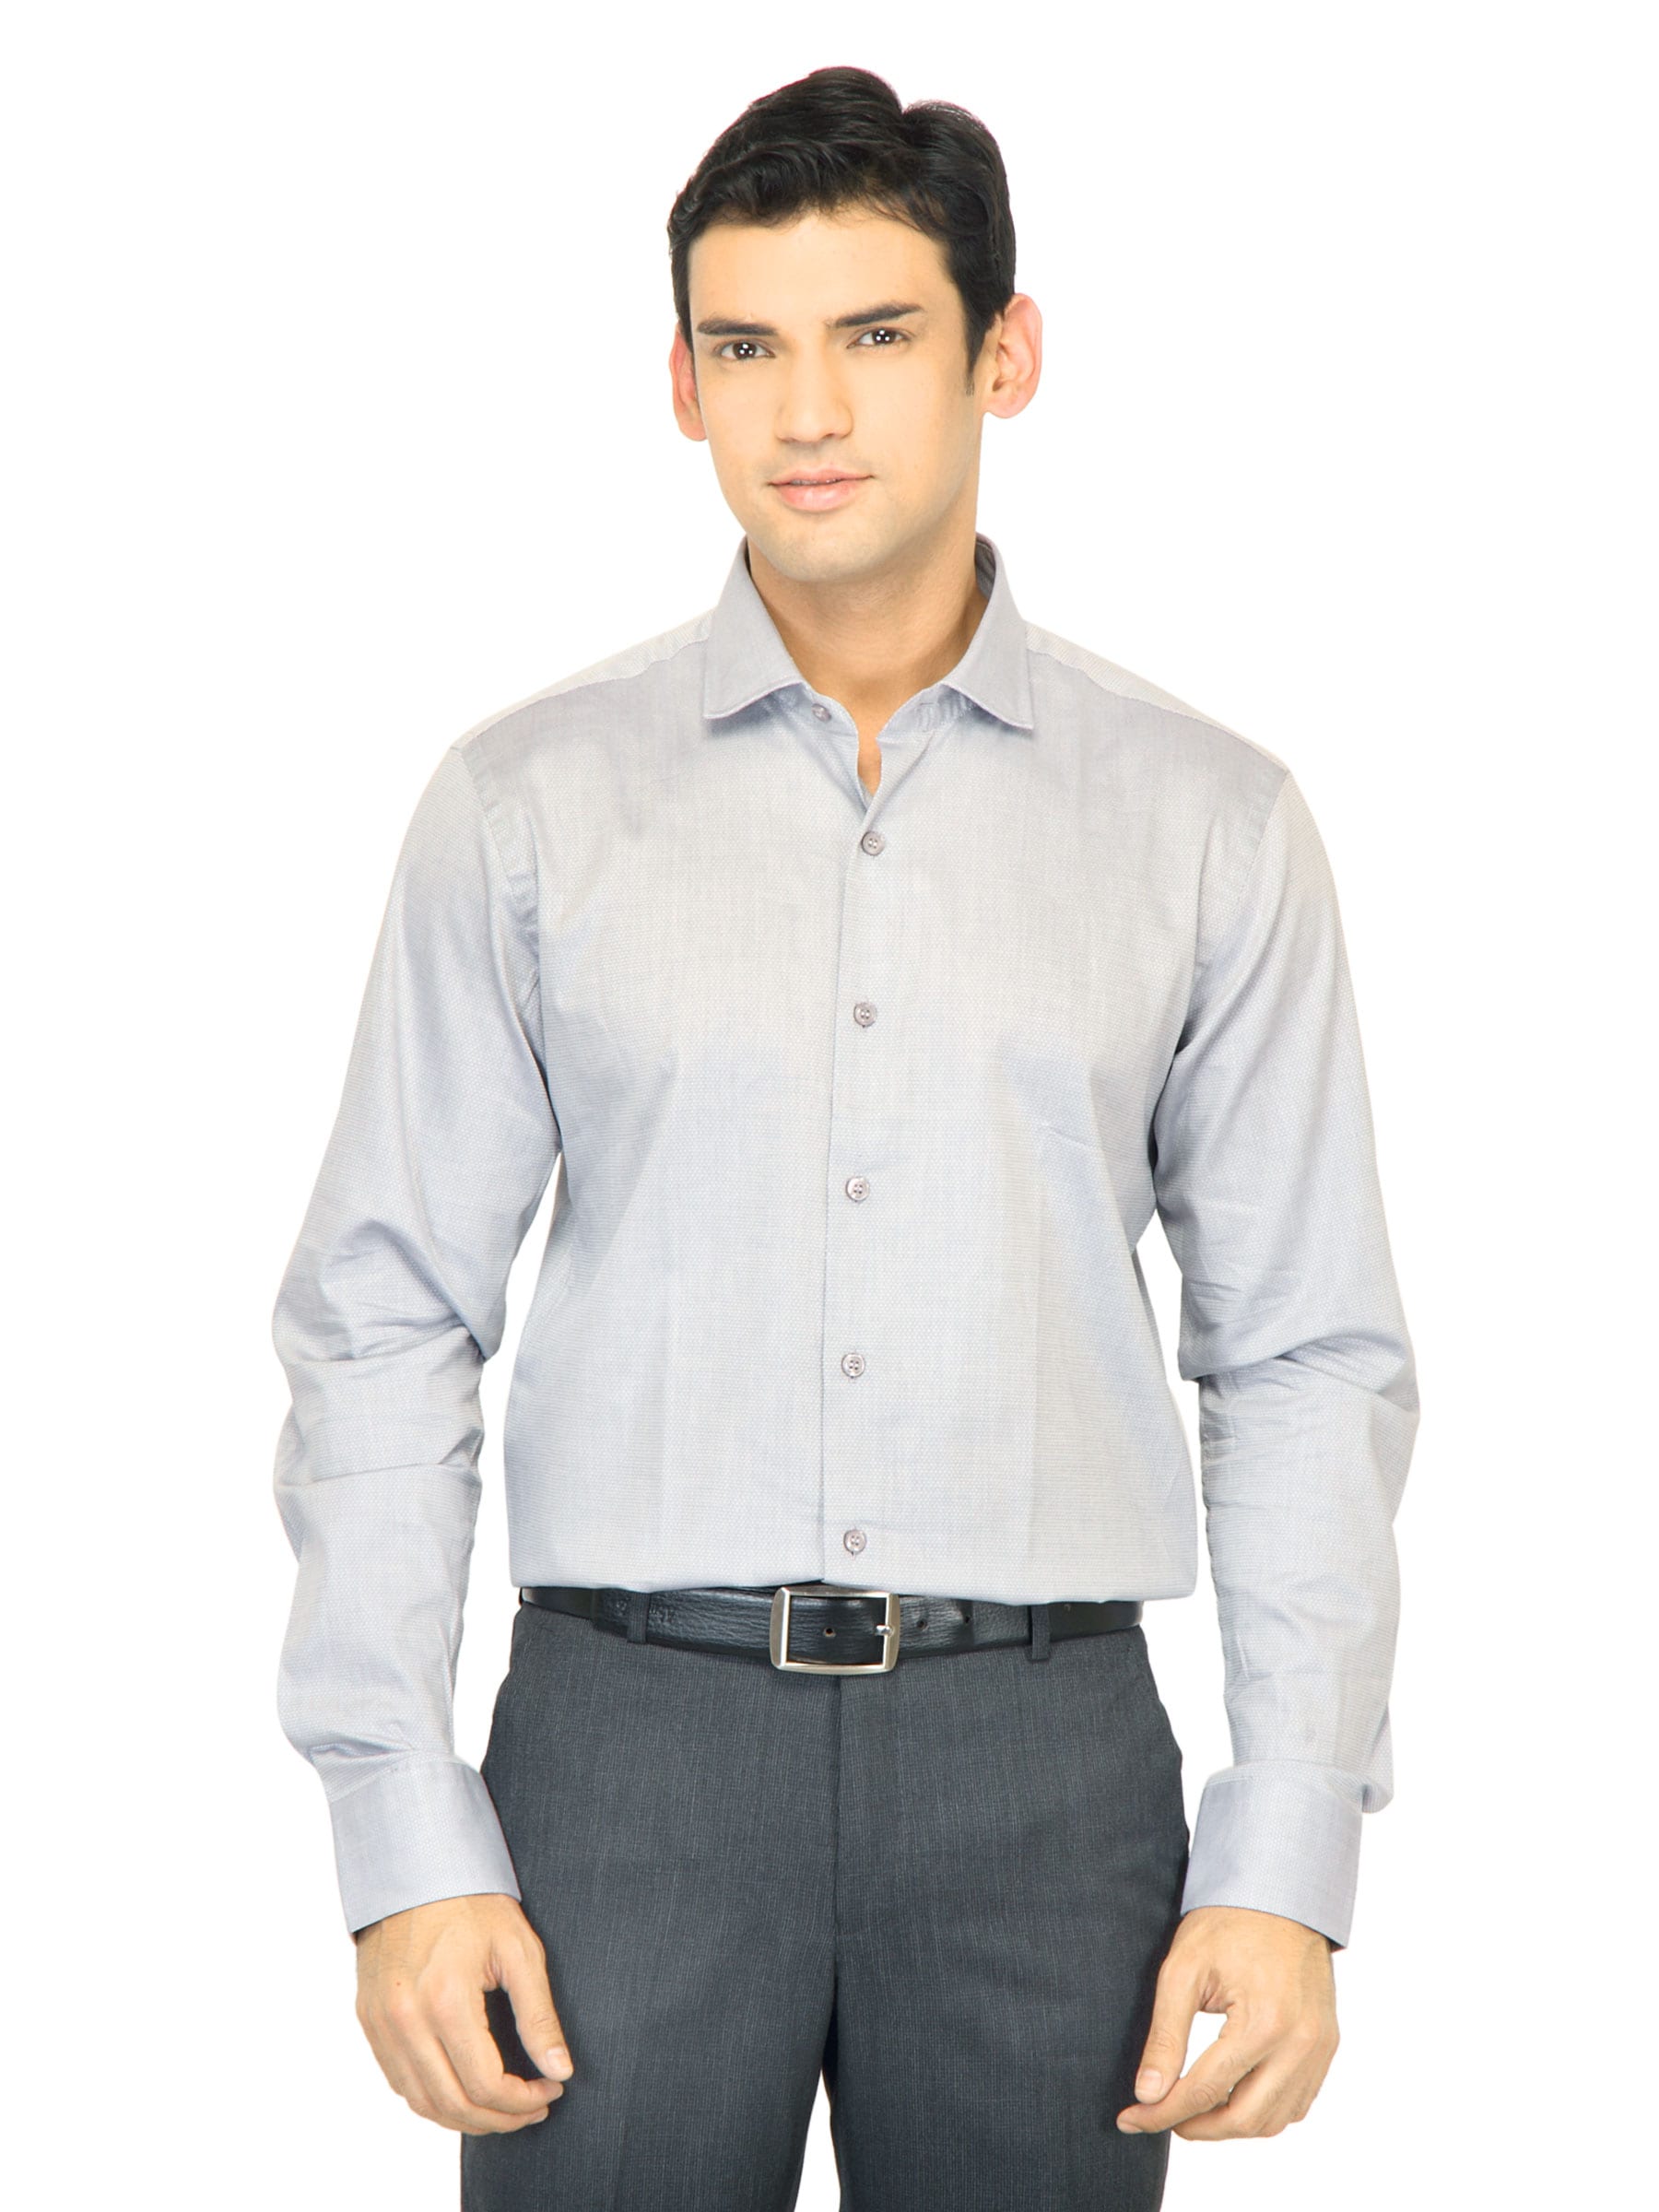 United Colors of Benetton Men Solid Grey Shirt